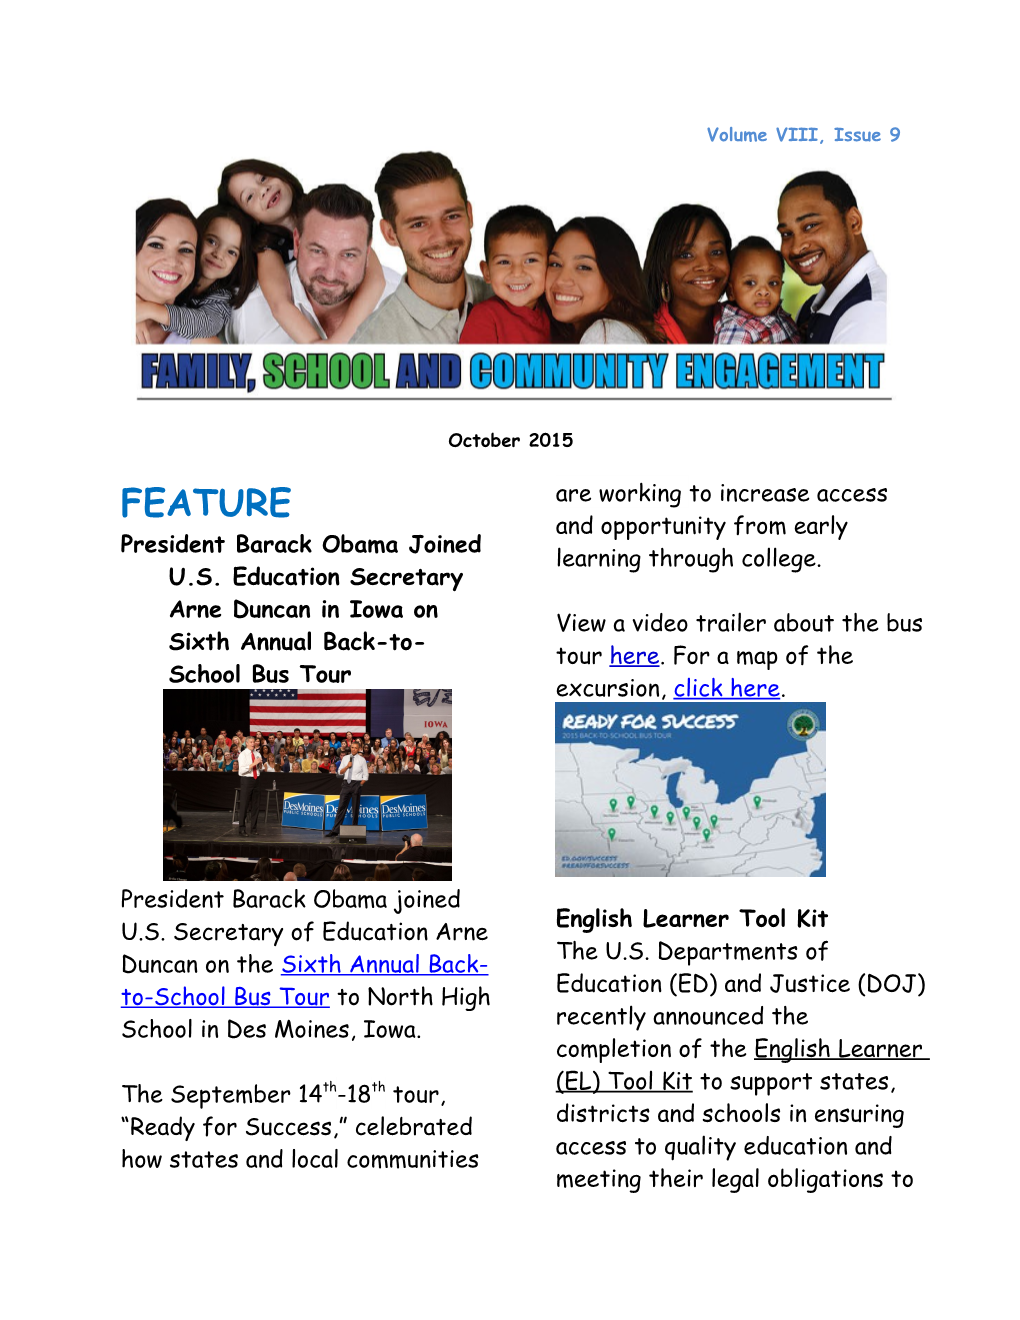 Engaging Families, Volume 8, Issue 9 - October 2015 (MS Word)